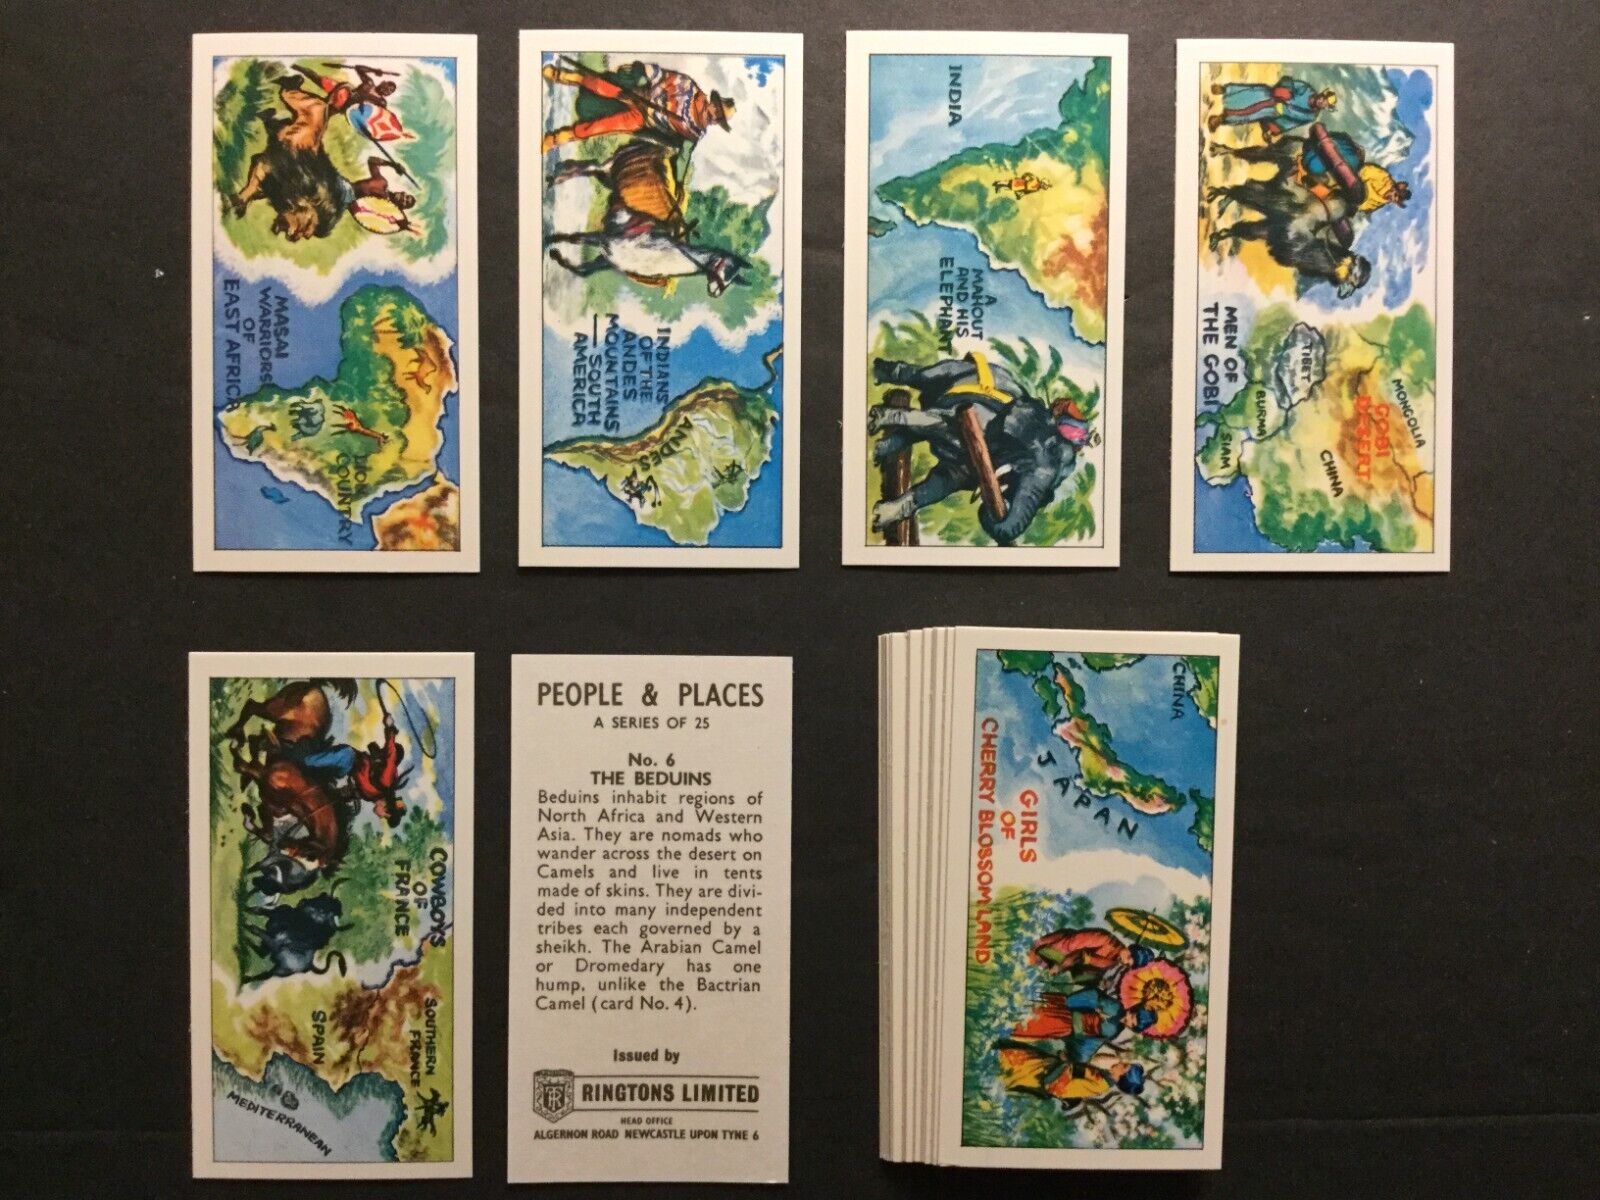 1964 Ringtons People and Places Set of 25 Cards Sku637N